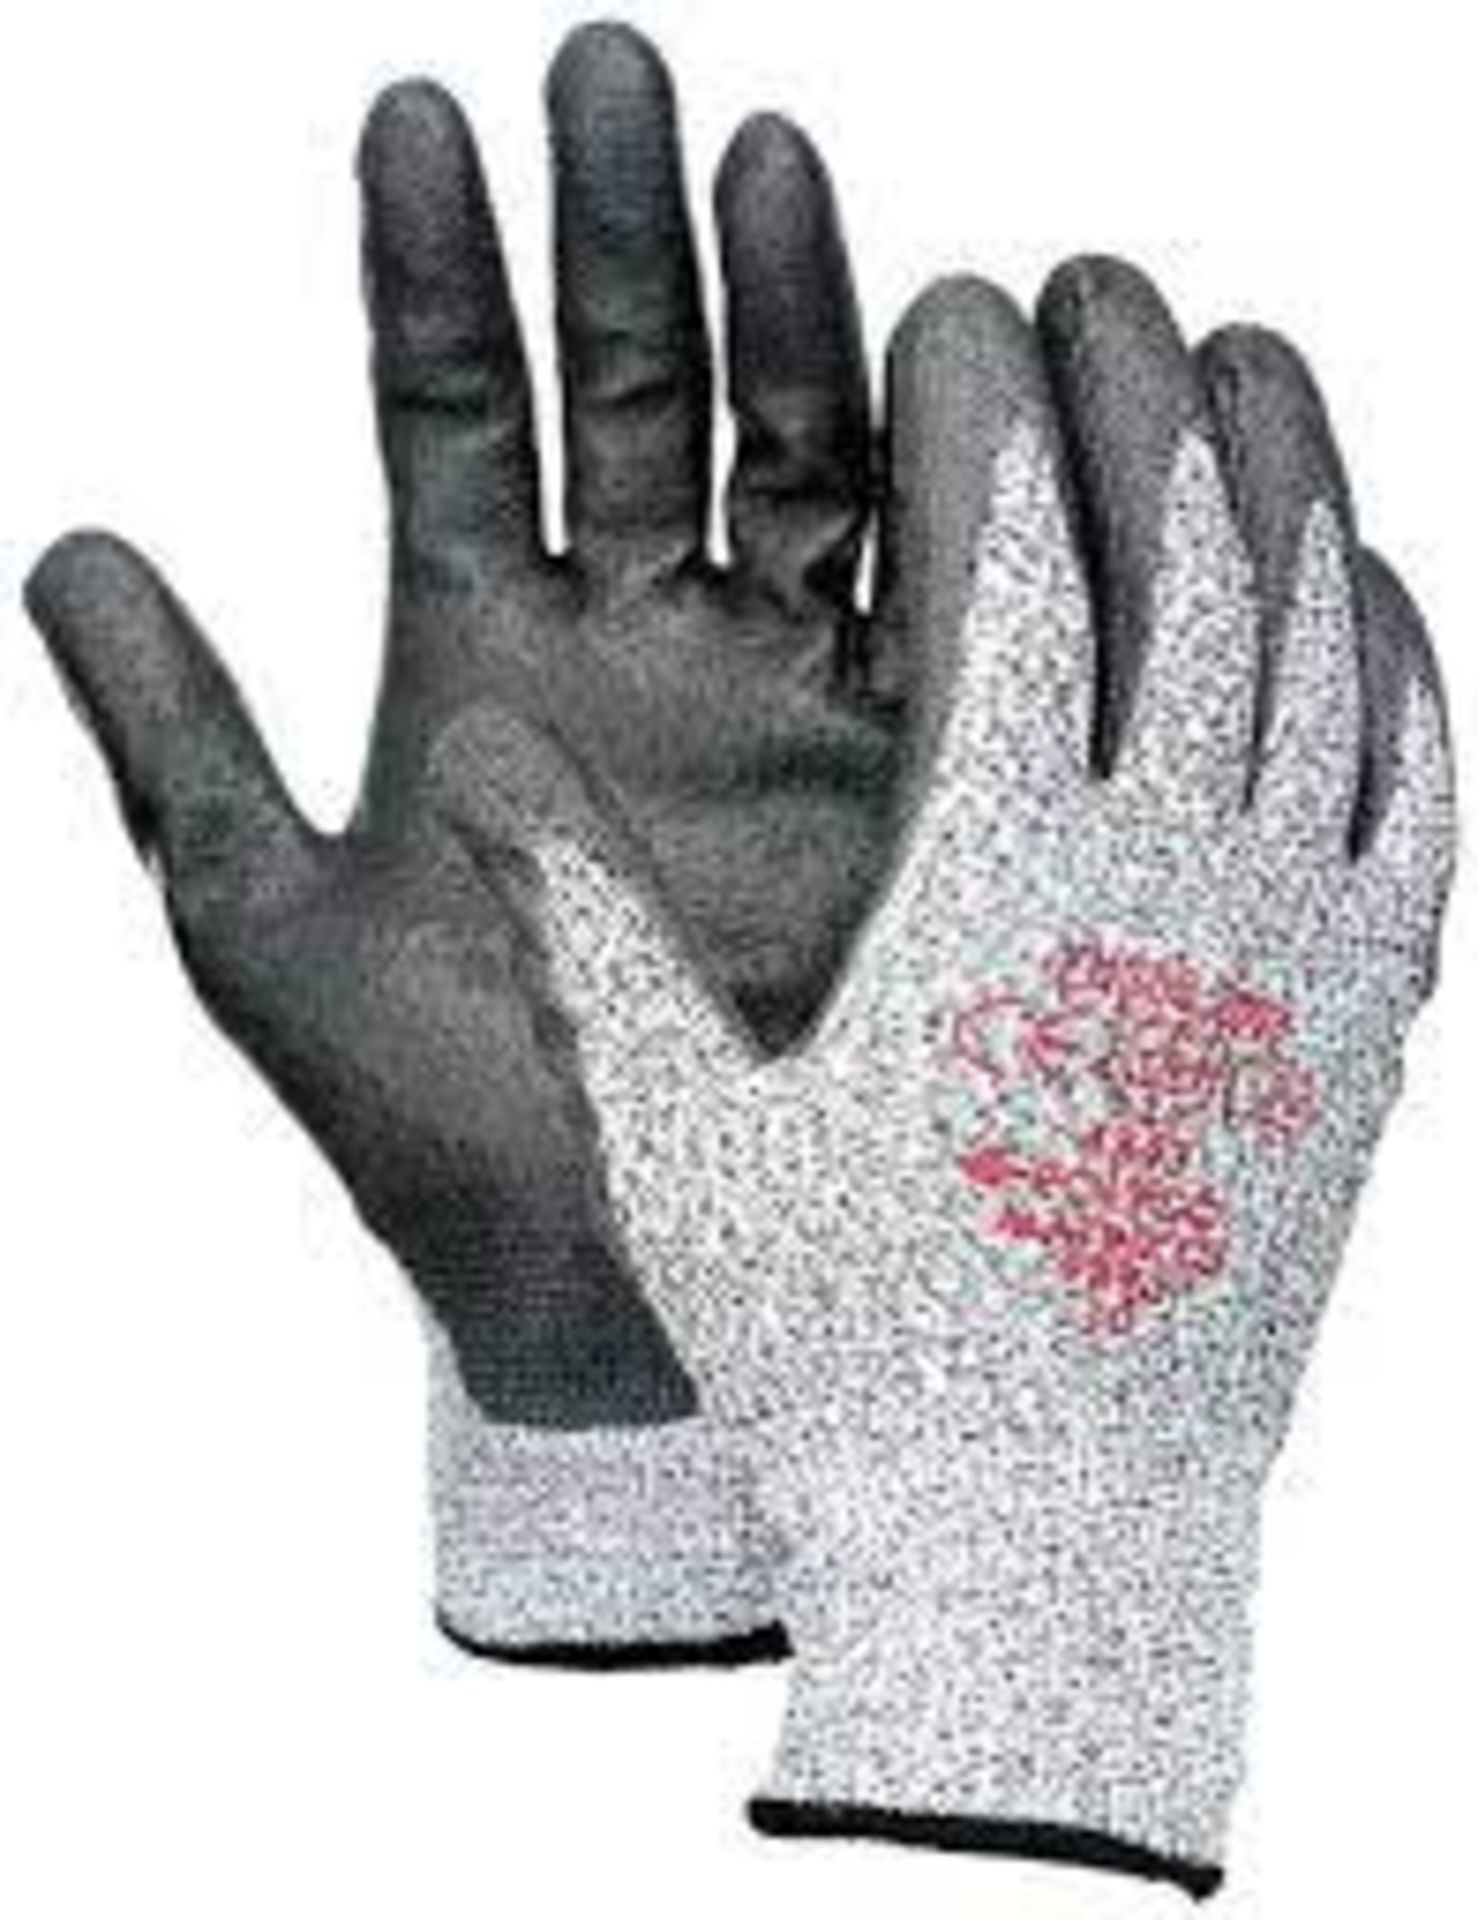 100 X BRAND NEW POLYCO MATRIX C3 POLYURETHANE COATED GLOVES SIZES 7 AND 8 RRP £15 EACH